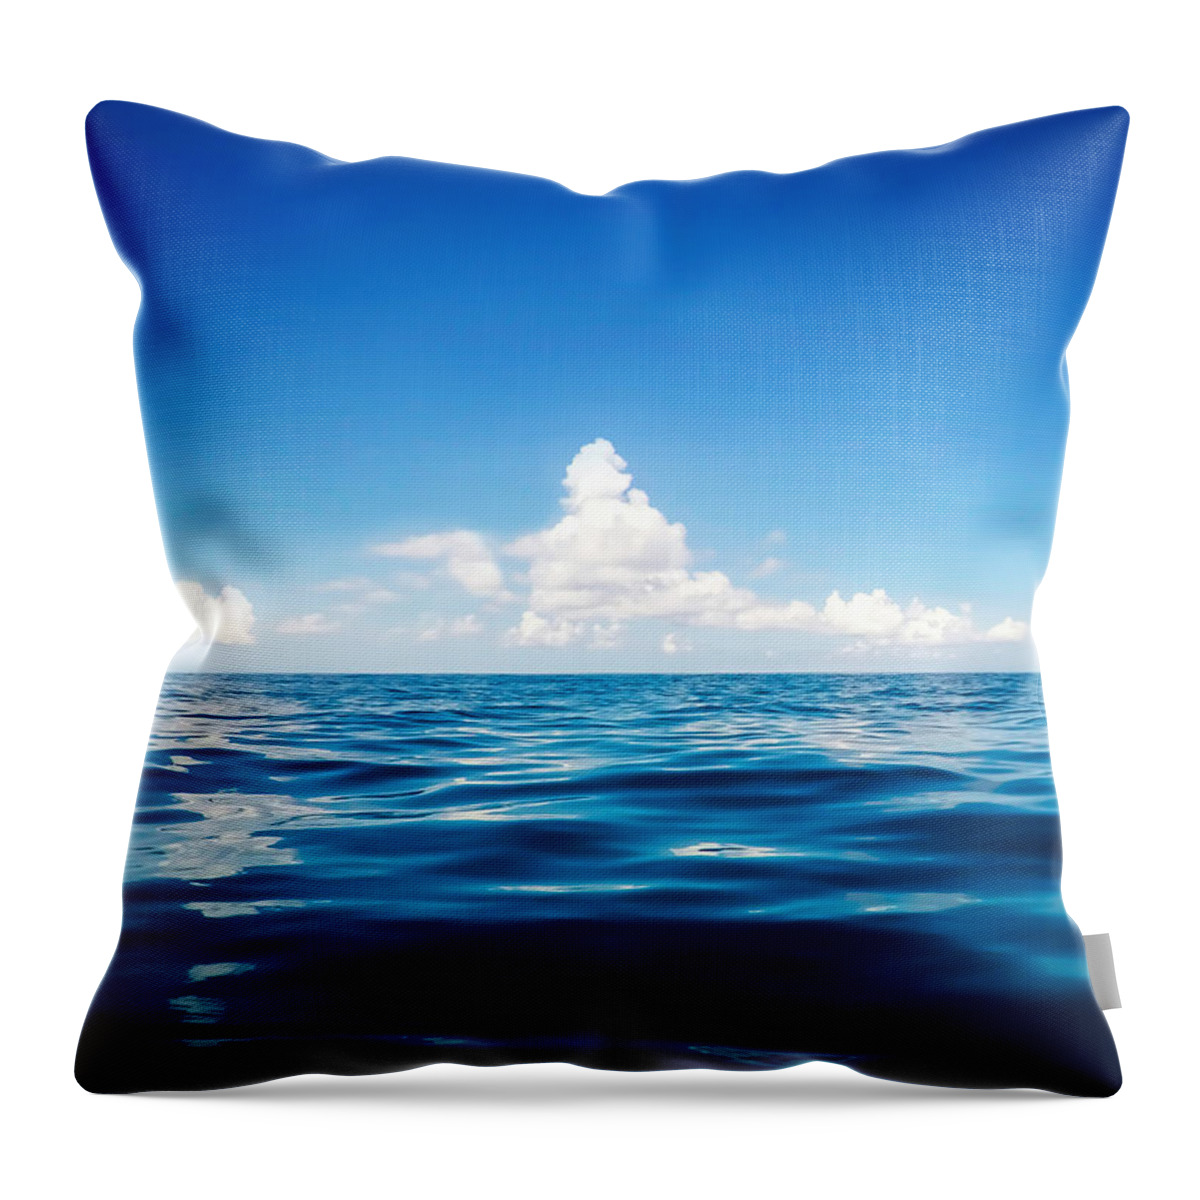 Sea Throw Pillow featuring the photograph Deep Blue by Nicklas Gustafsson